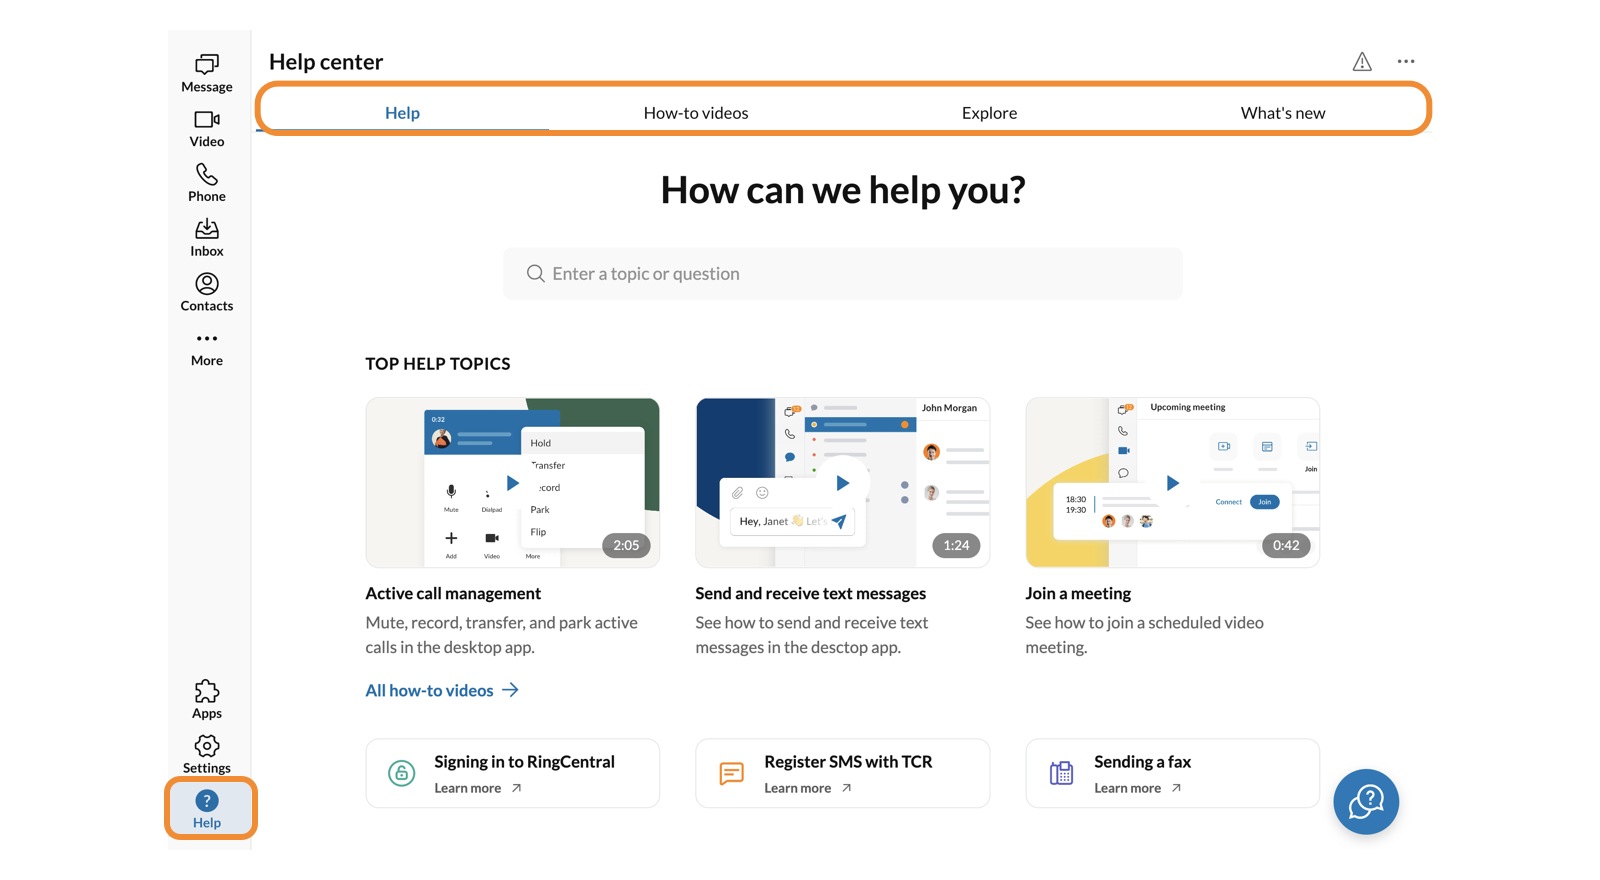 Automatisering creatief markt Using the Help center in the RingCentral app